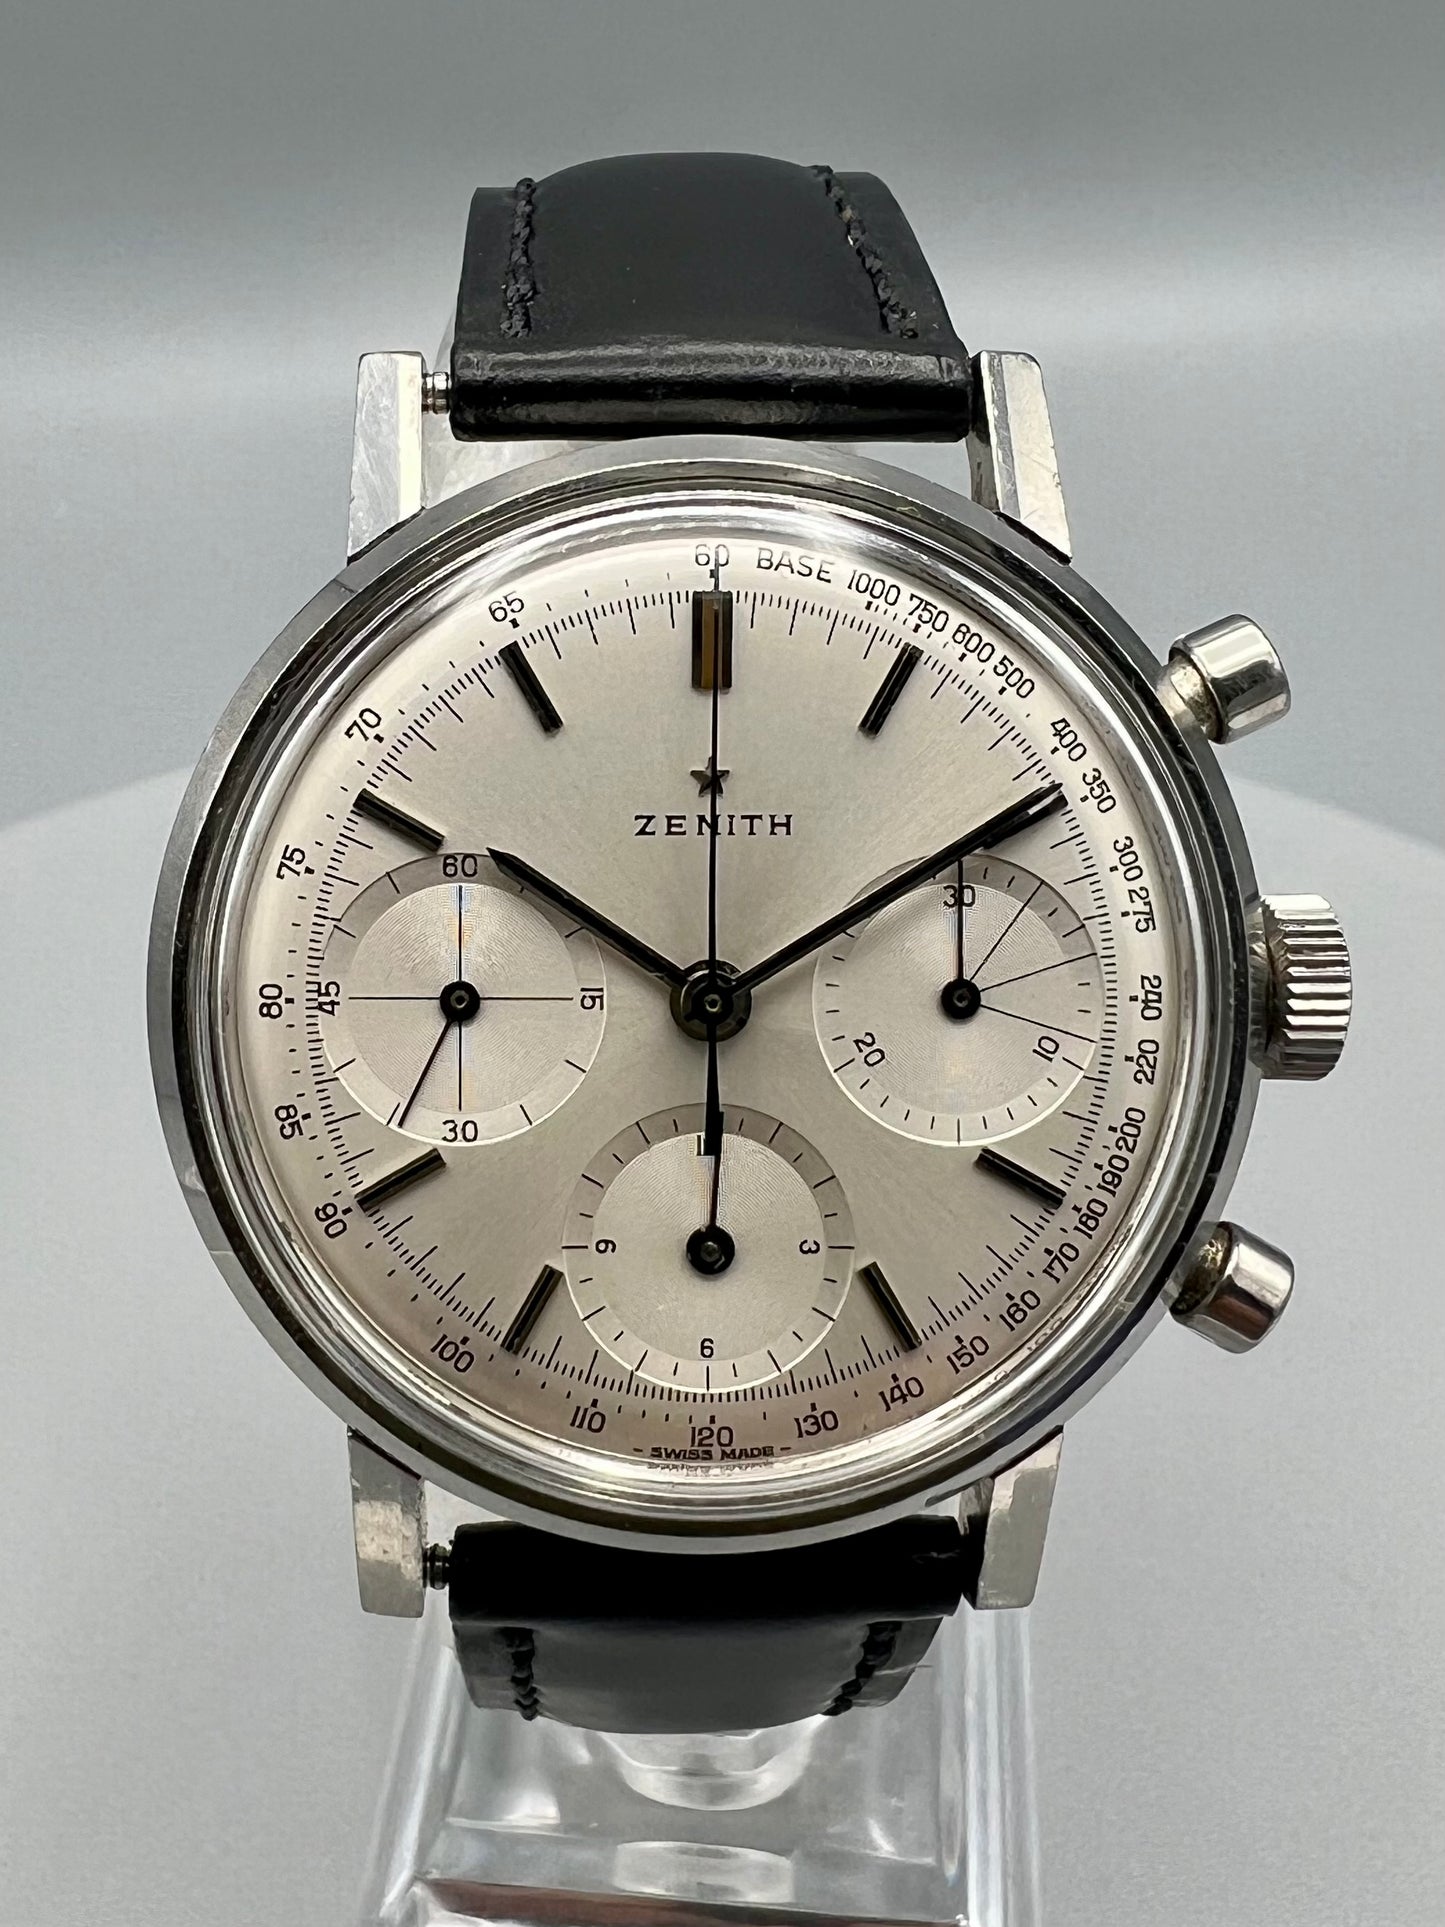 Zenith ref A273 Cailber 146HP Chronograph 1960s